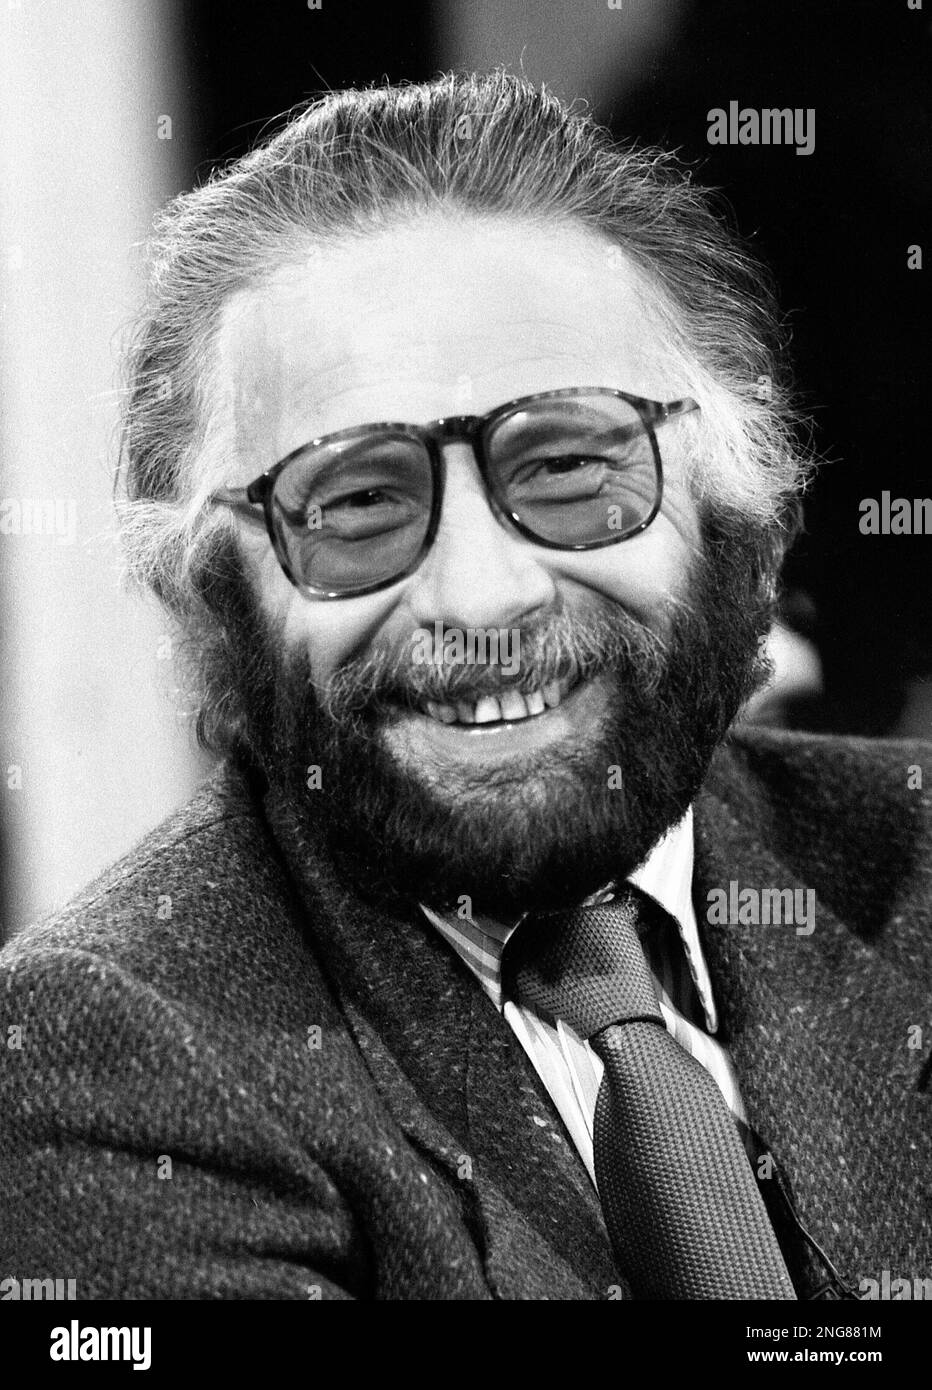 German writer Fritz J. Raddatz who was in charge for the feuilleton of the German newspaper 'Die Zeit' (the time) flashes a smile during the 'channel free Berlin' TV talk show "Leute" (people) February 14, 1986 in Cafe Kranzler in Berlin, West Germany. (AP Photo/Andreas Schoelzel) --- Fritz J. Raddatz ex-Feuilleton-Chef der "Zeit" am 14. Februar 1986 in der Sender Freies Berlin (SFB) Talkshow "Leute" im Berliner Cafe Kranzler. (AP Photo/Andreas Schoelzel) Stock Photo